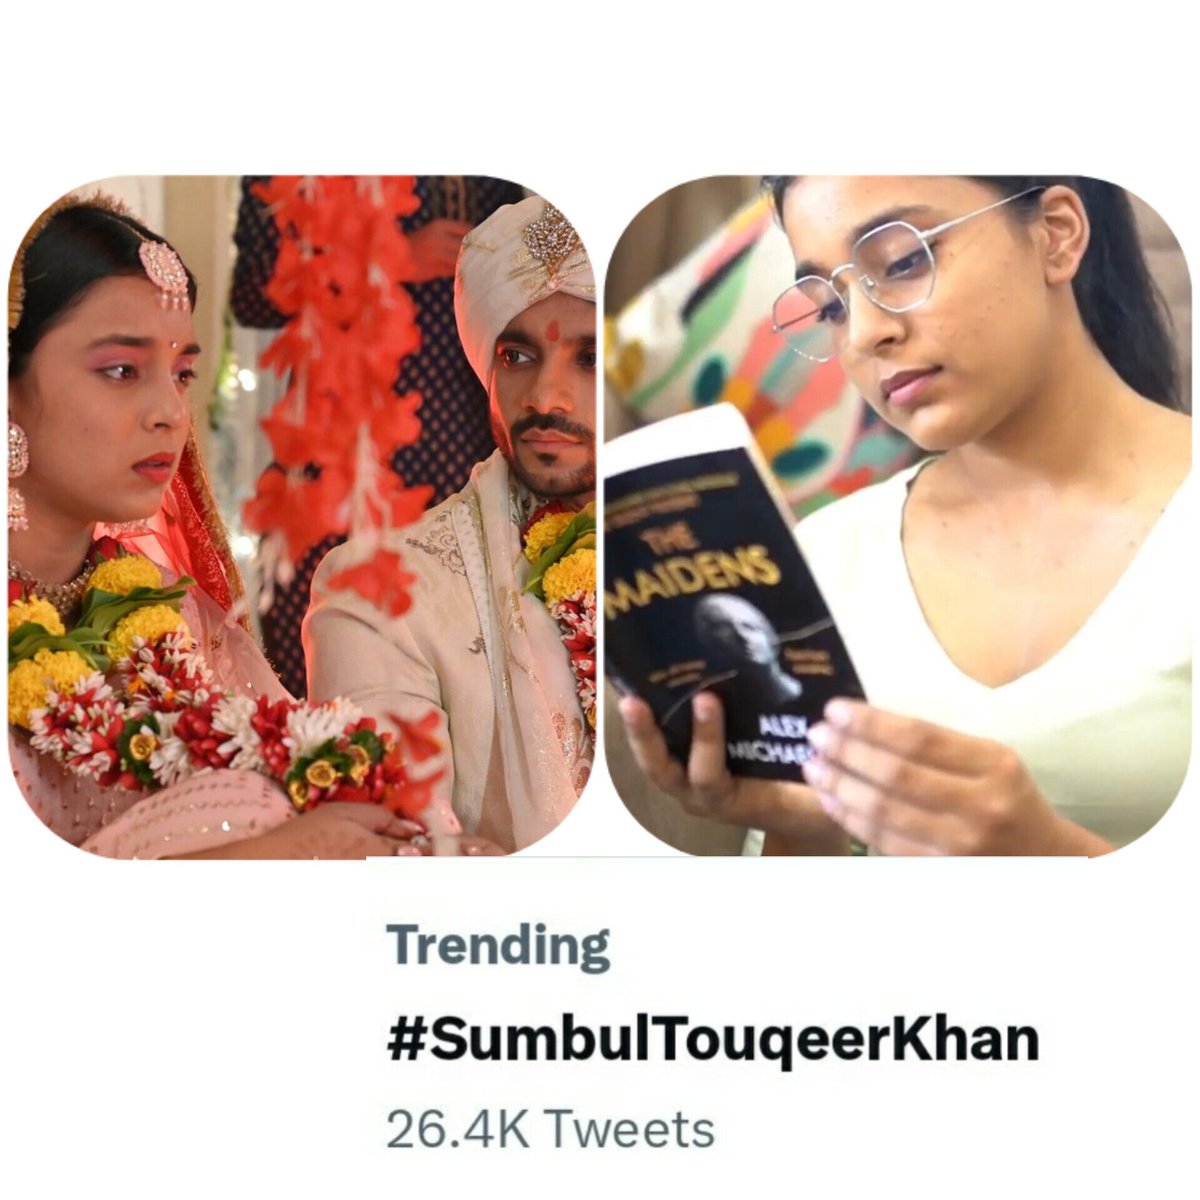 One shot from #DevilSeShaadi and a reel from her home 💣my girl is trending this how the neutral and organic fans love her.
Keeping shining and stay winning ❤🙏

#SumbulTouqeerKhan #SumbulSquad #SumbulTouqeer #fanfavorite